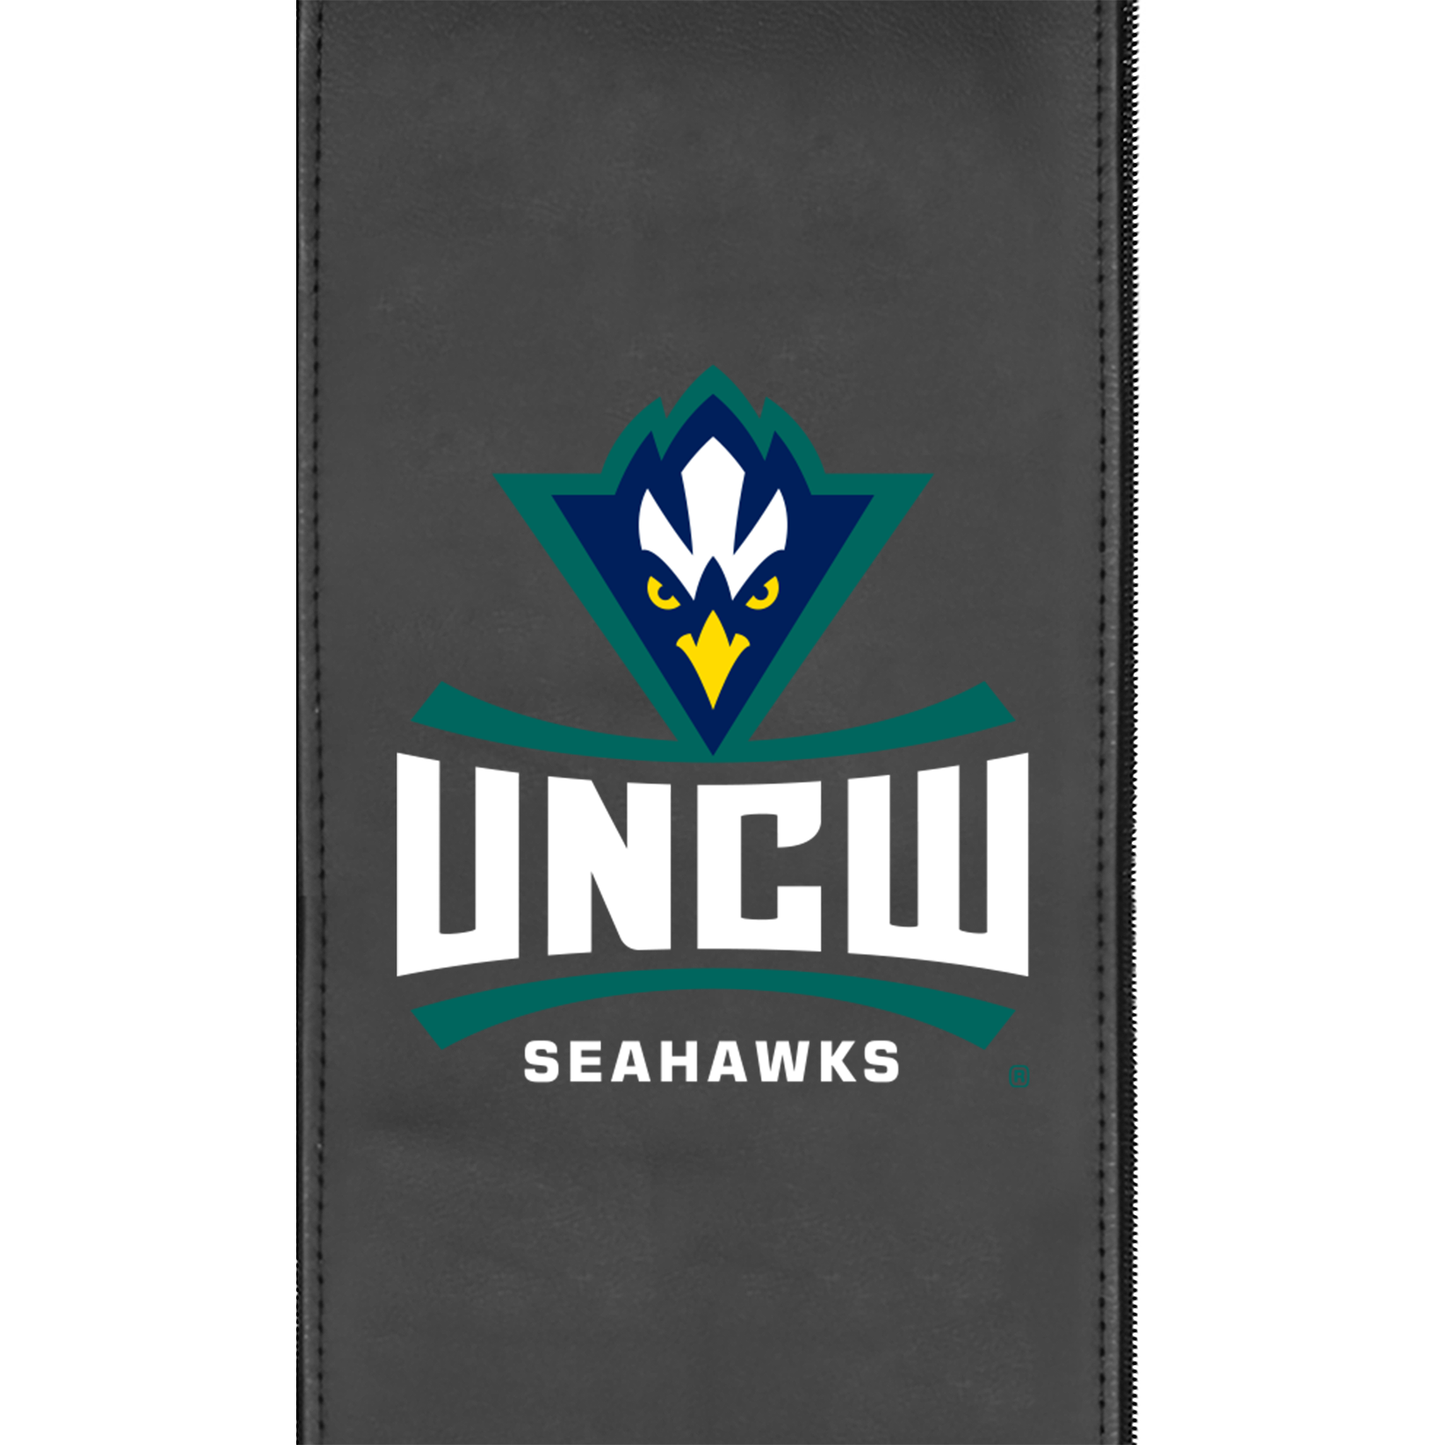 Silver Club Chair with UNC Wilmington Primary Logo